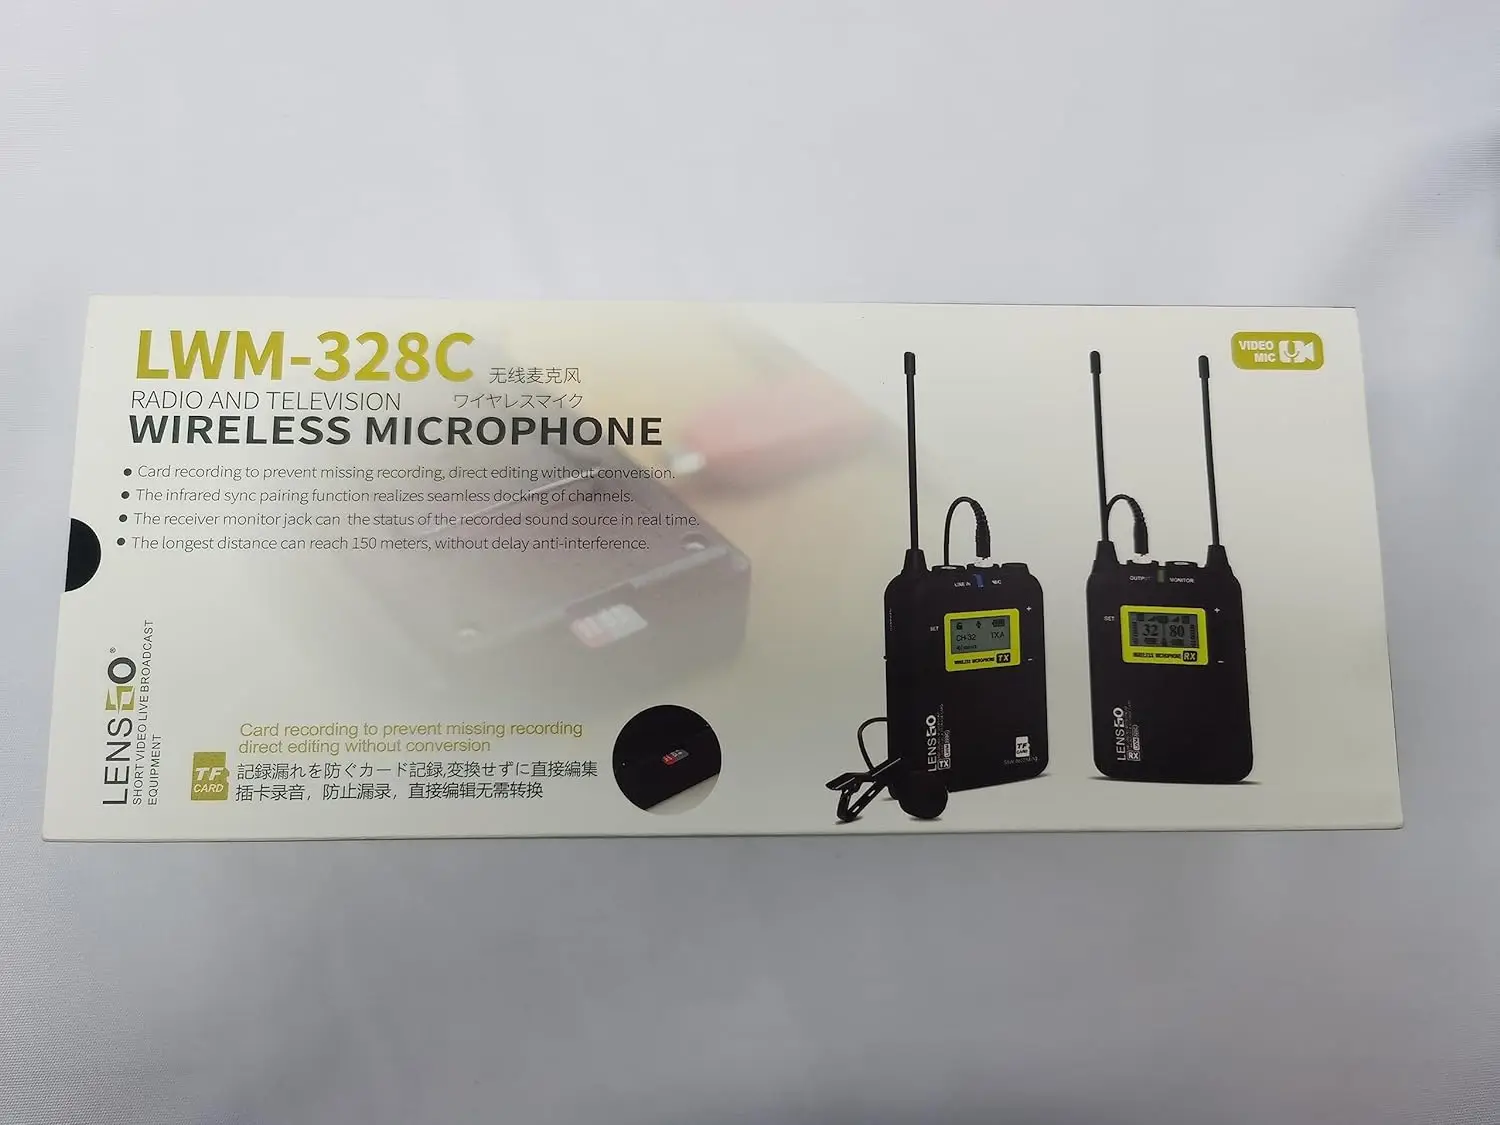 LENSGO Wireless Lavalier Microphone System LWM-328C Omnidirectional Mic for Camera Smartphone Camcorder Recorder Interview